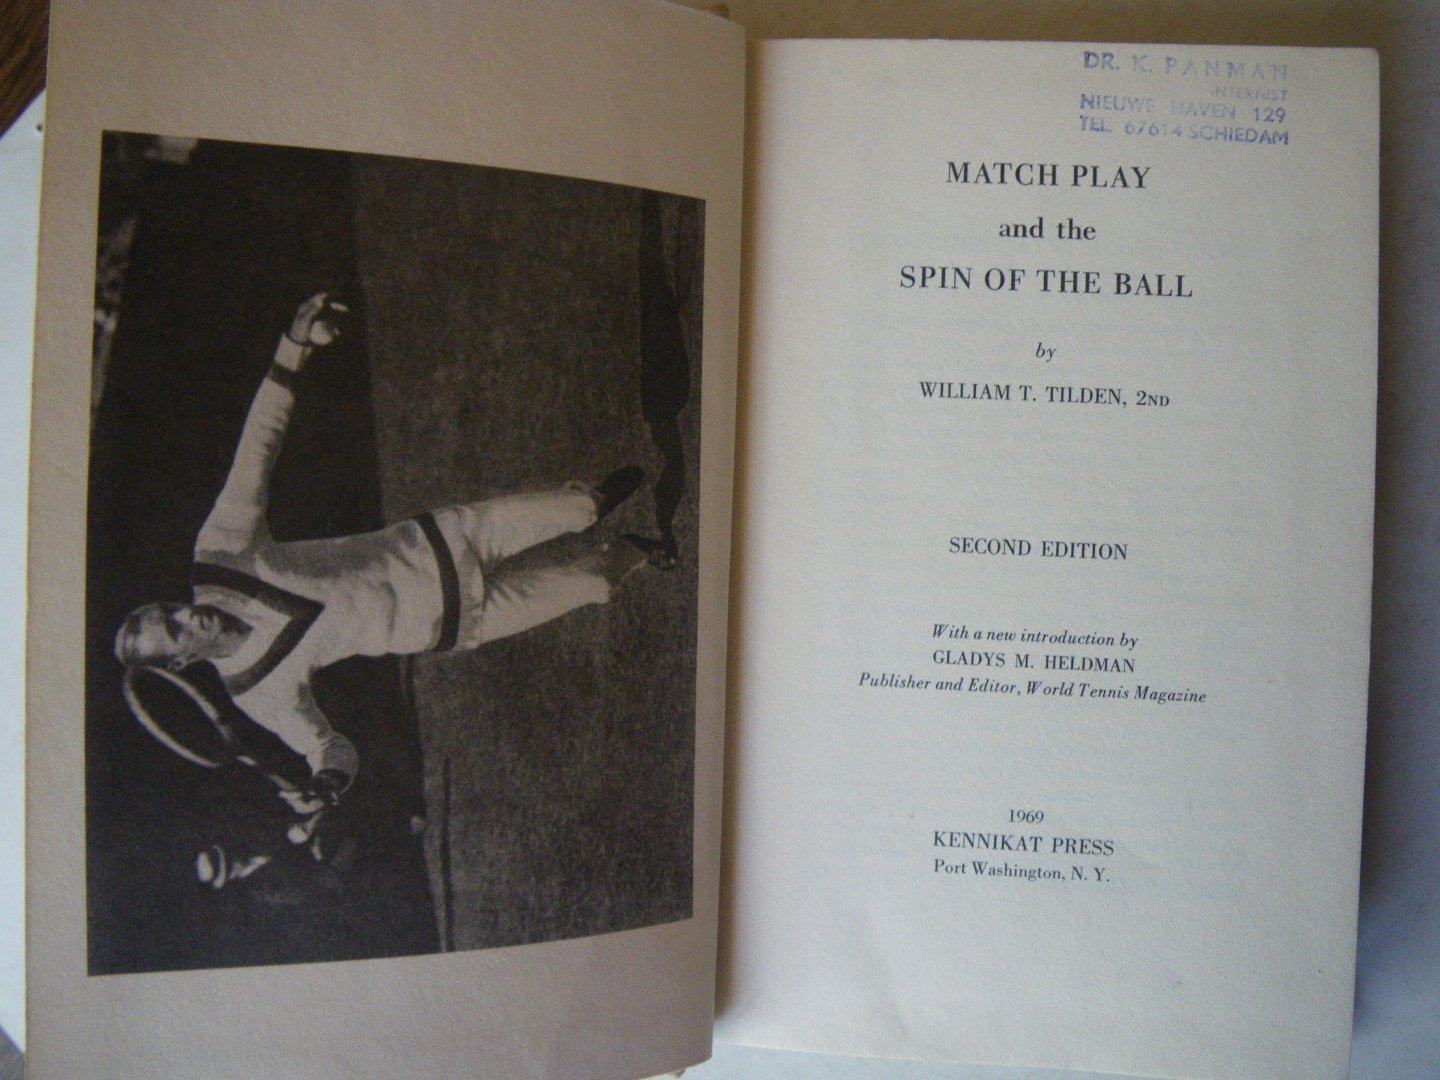 Tilden, William T. 2nd - Match play and the spin of the ball